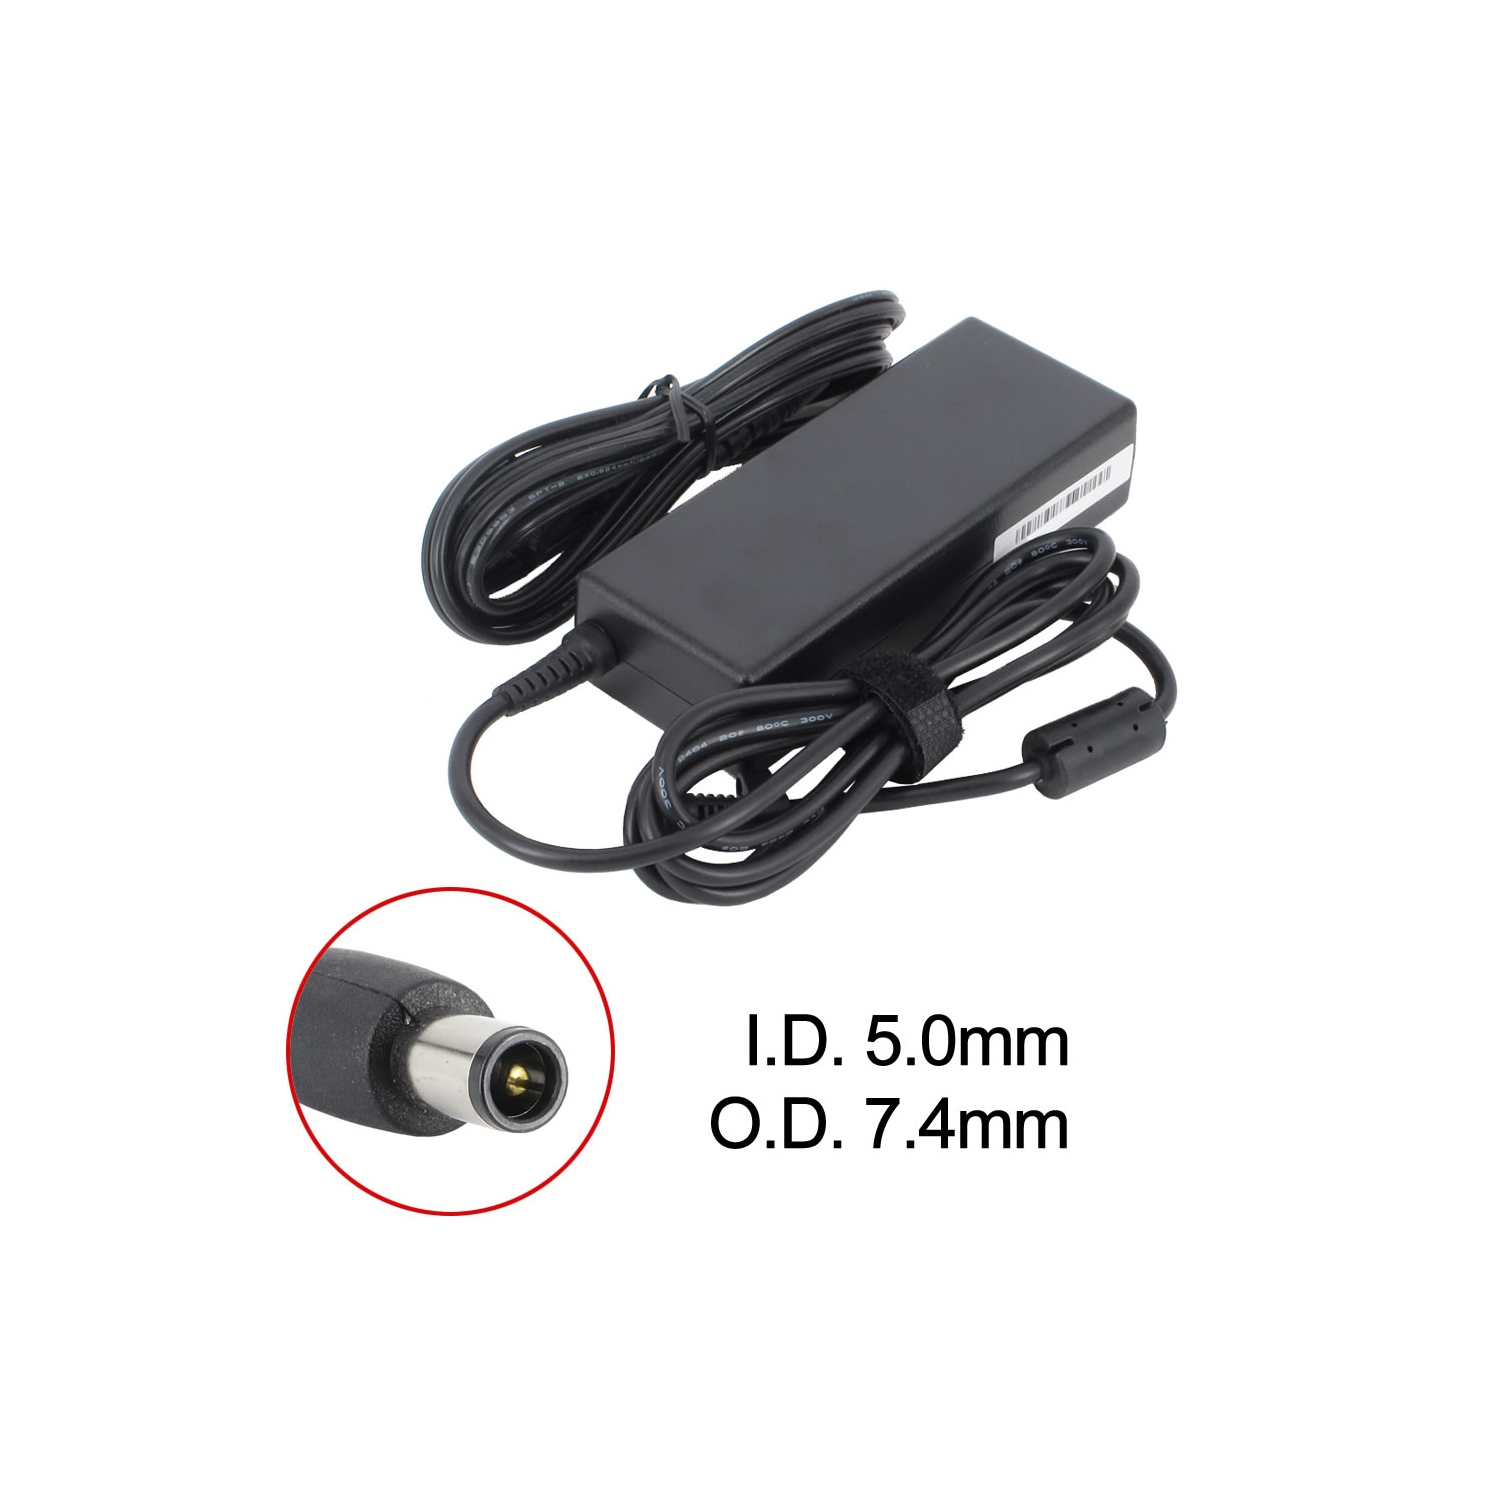 New Laptop AC Adapter for Dell Inspiron 15 (3520), 09T215, 310-7251, 310-9376, 331-5968, CF823, FA90PM135, N6M8J, TJ76K